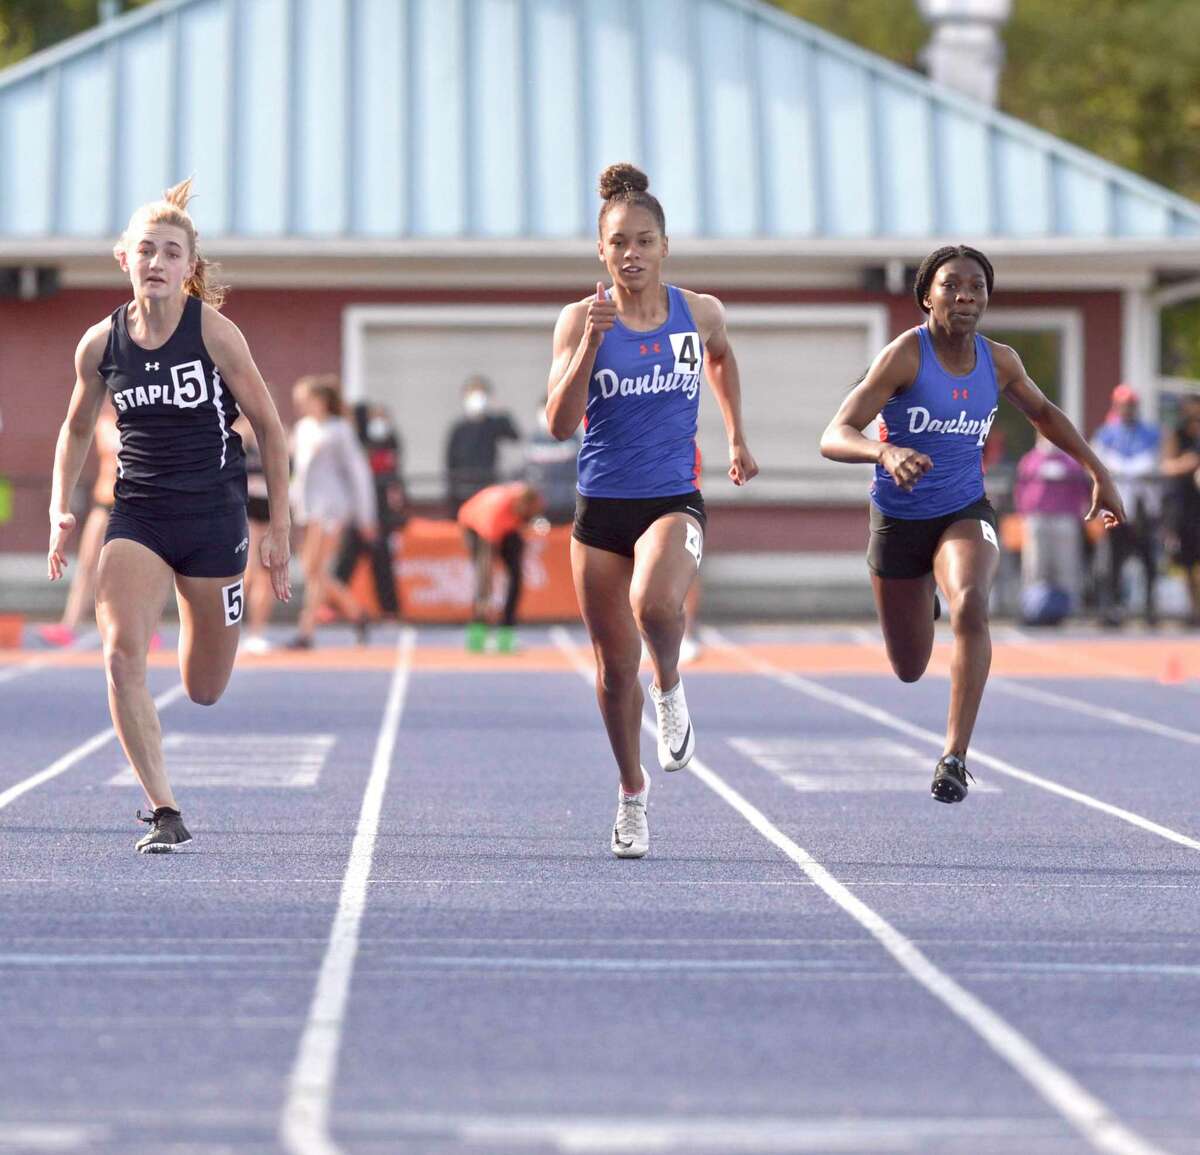 Danbury's Alanna Smith, (lane 4) finished first in the 100 meter dash). Wilton's Staples Francine Stevens, left, and Danbury's Florence Dickson, right, follow. FCIAC girls tack championships at Danbury High School, Monday afternoon, May 24, 2021, in Danbury, Conn.